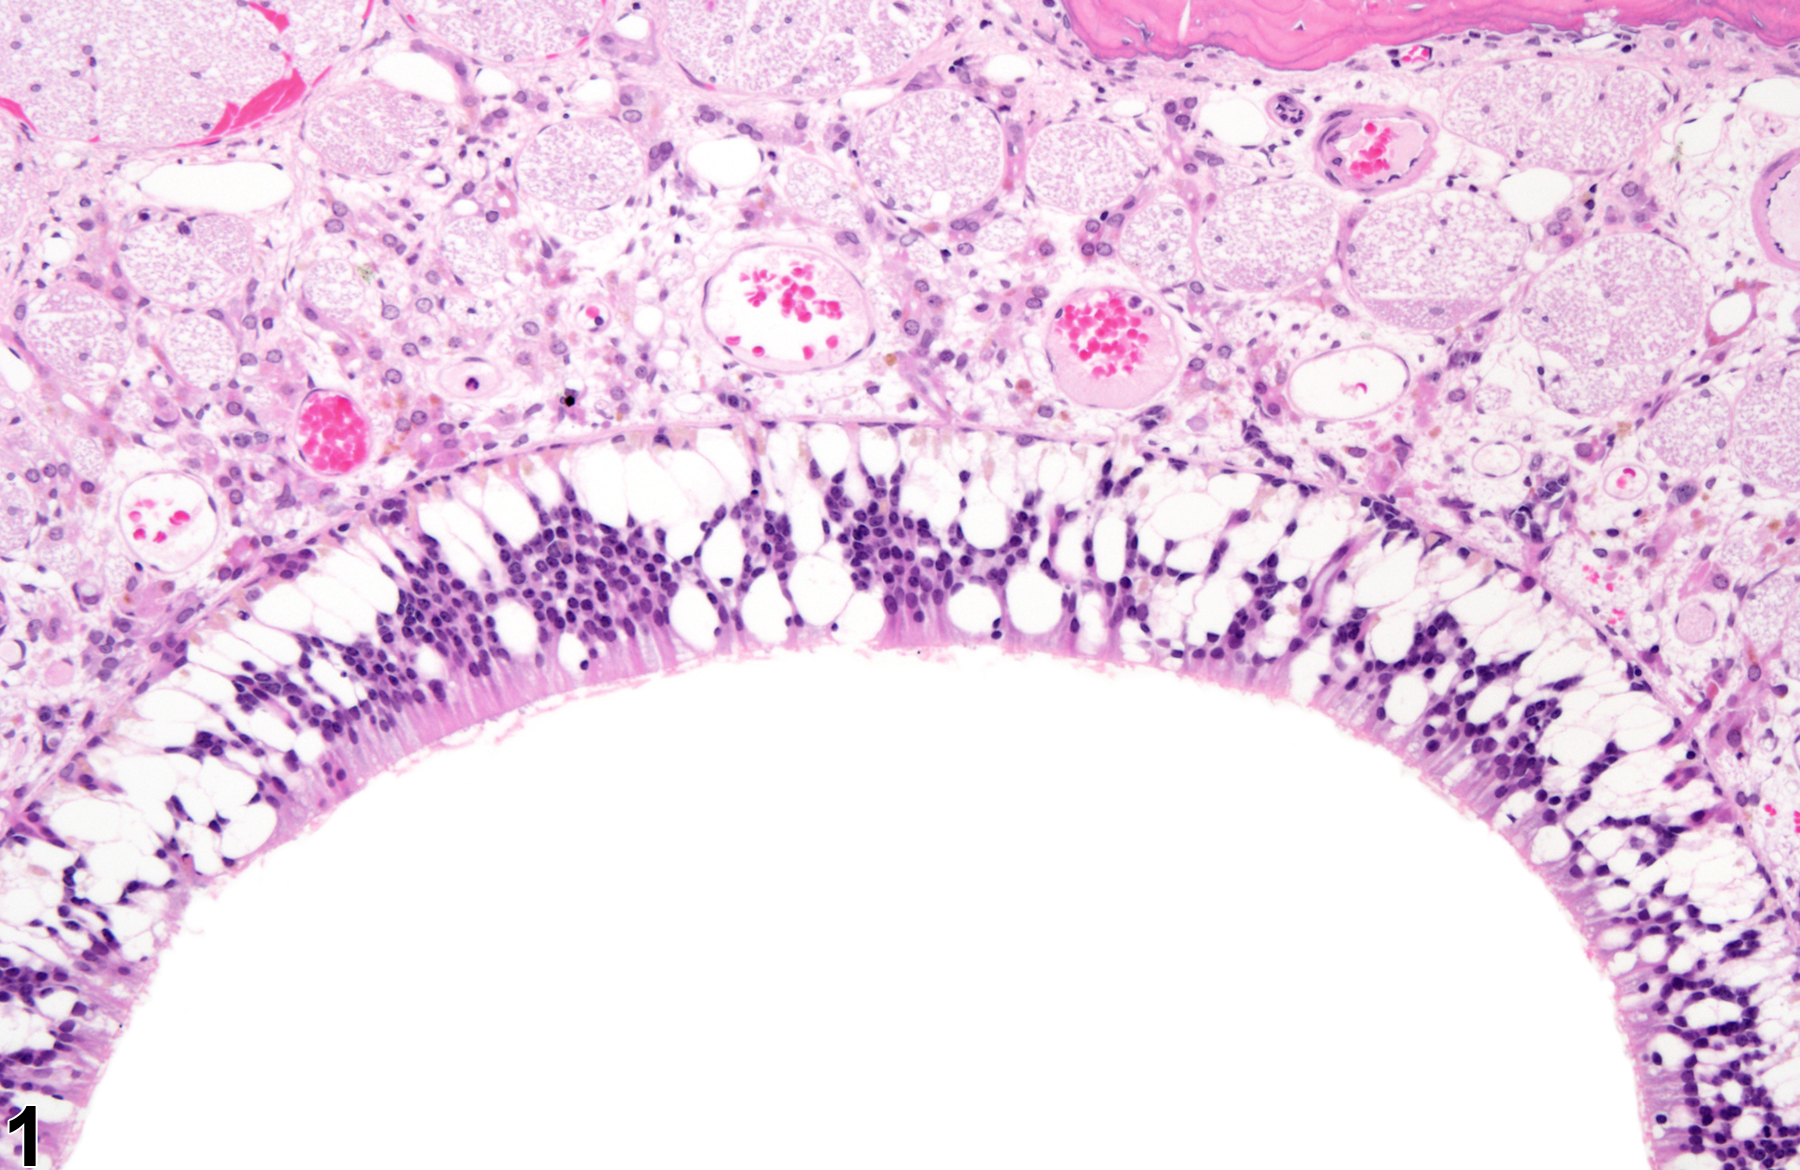 Image of degeneration in the nose, olfactory epithelium from a male F344/N rat in a chronic study